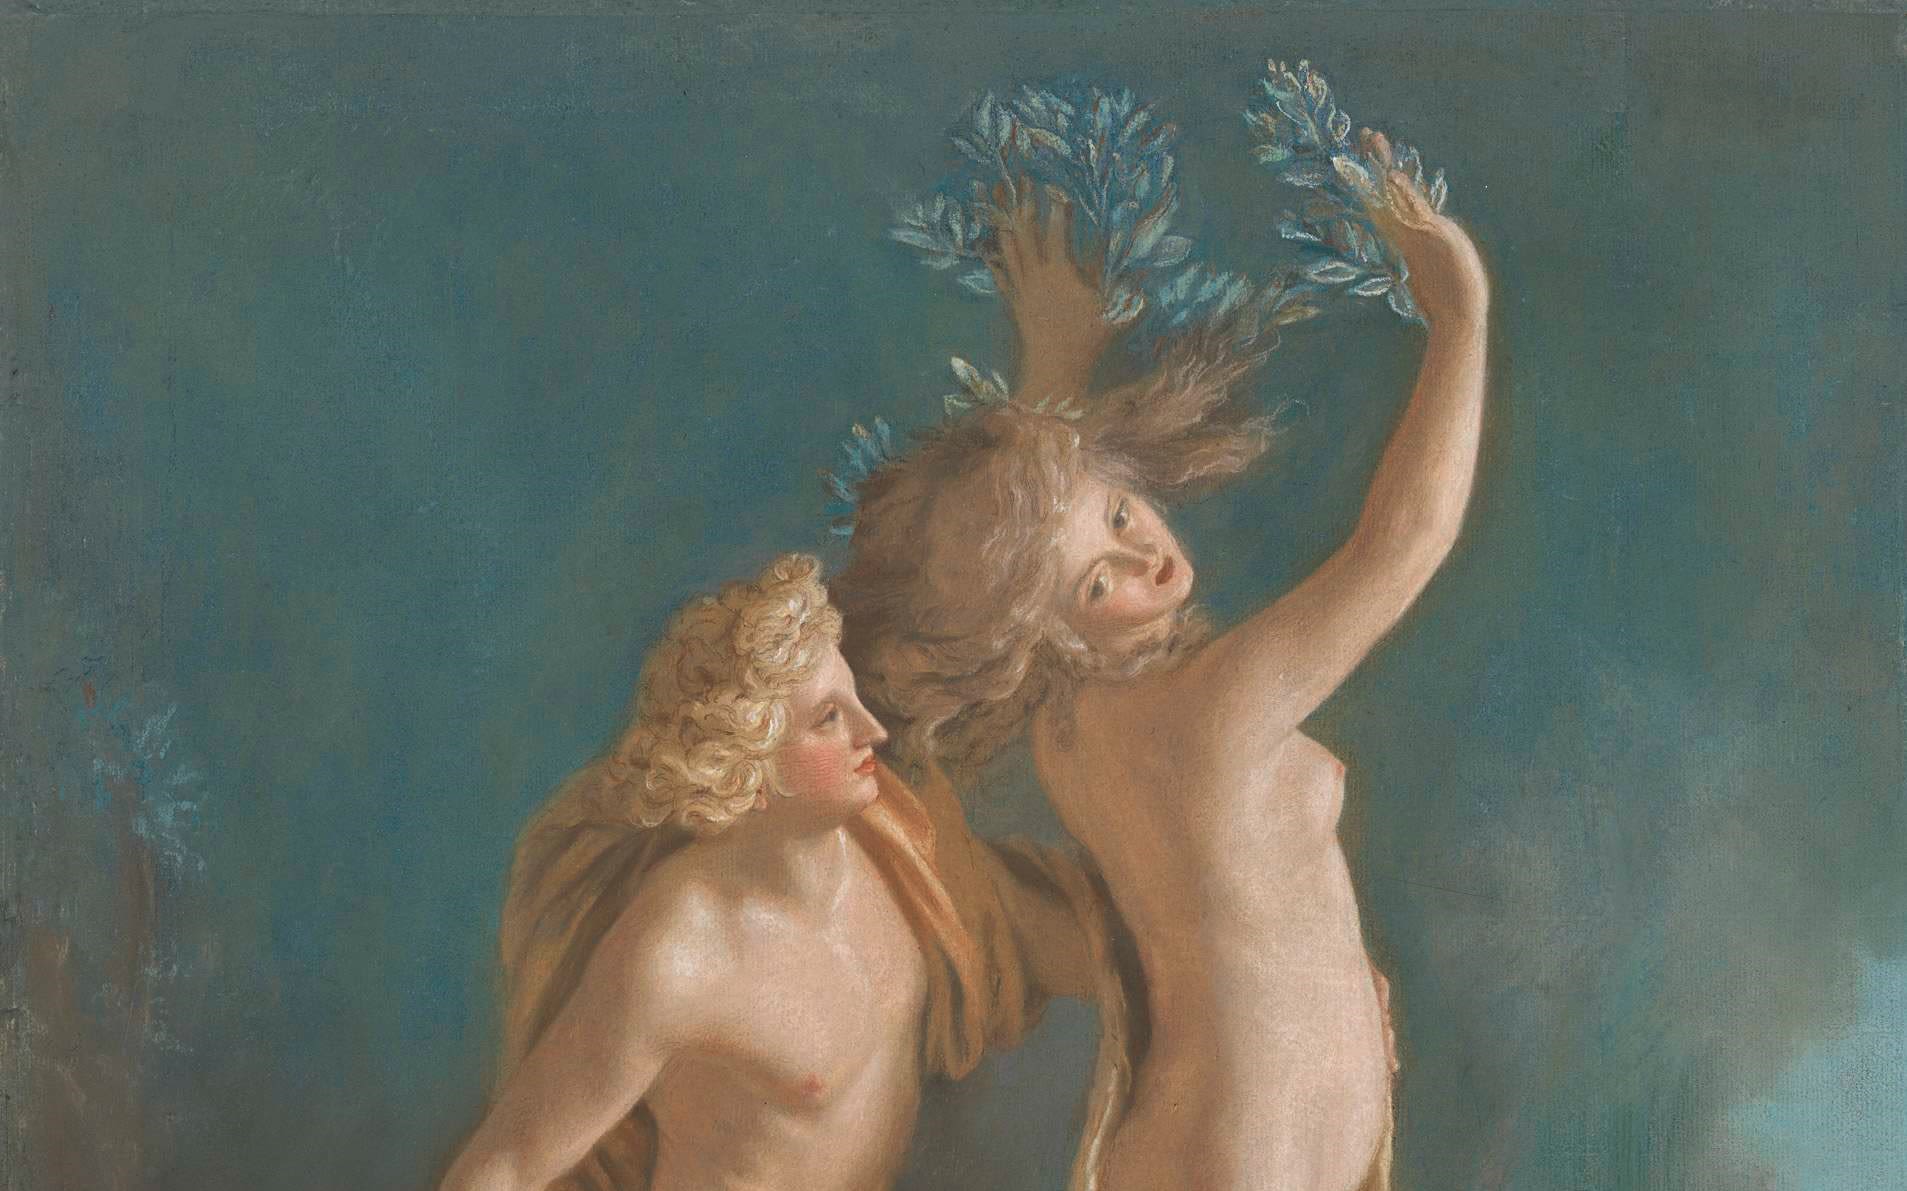 an oil painting showing two nude women, one holding the other while the other's hands sprout laurel leaves.